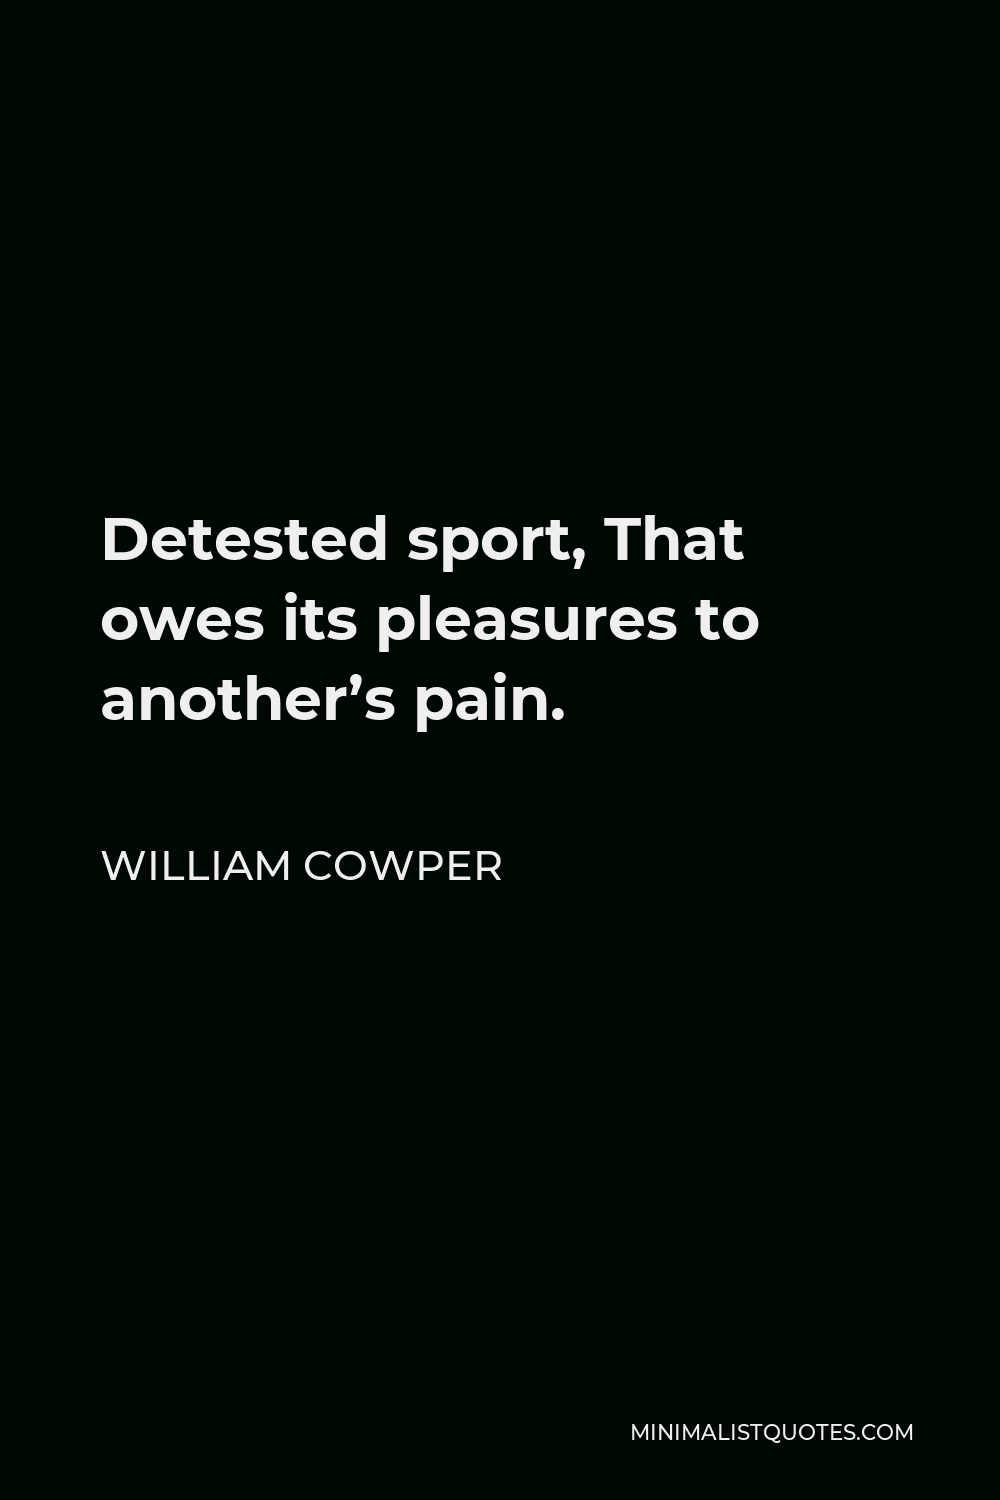 William Cowper Quote - Detested sport, That owes its pleasures to another’s pain.